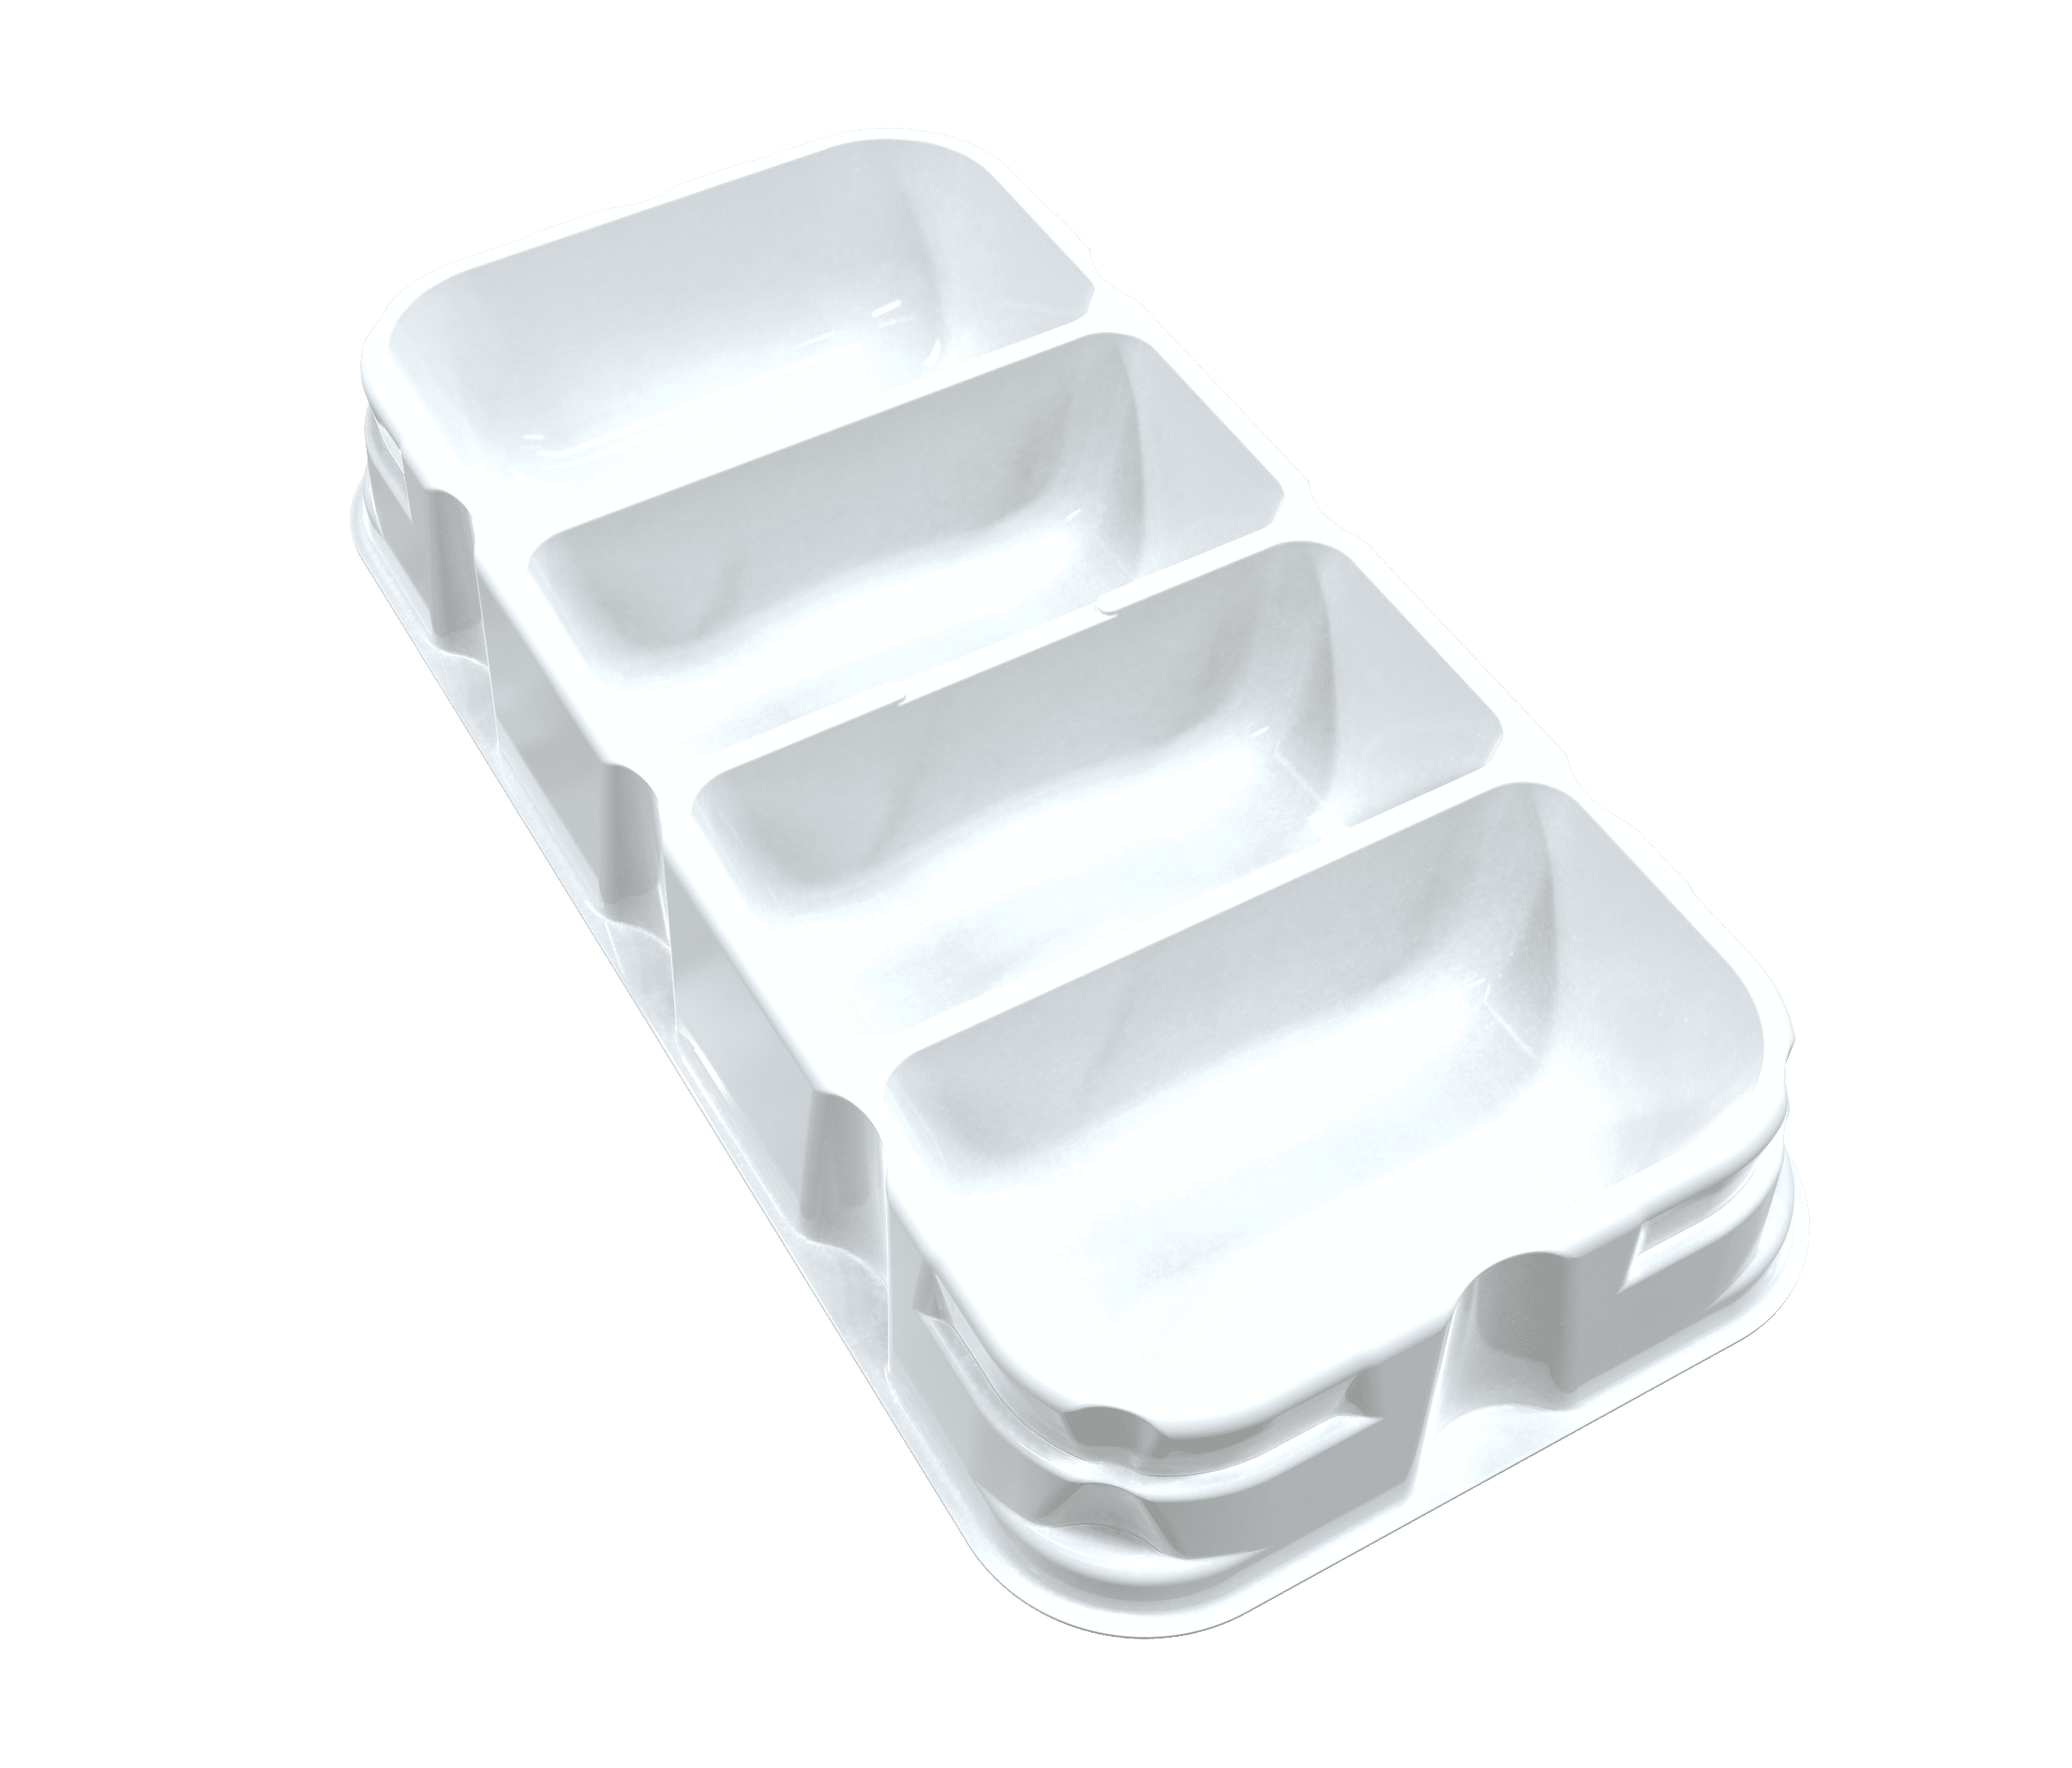 White 4-Cavity Y-Trayz (includes the lid)